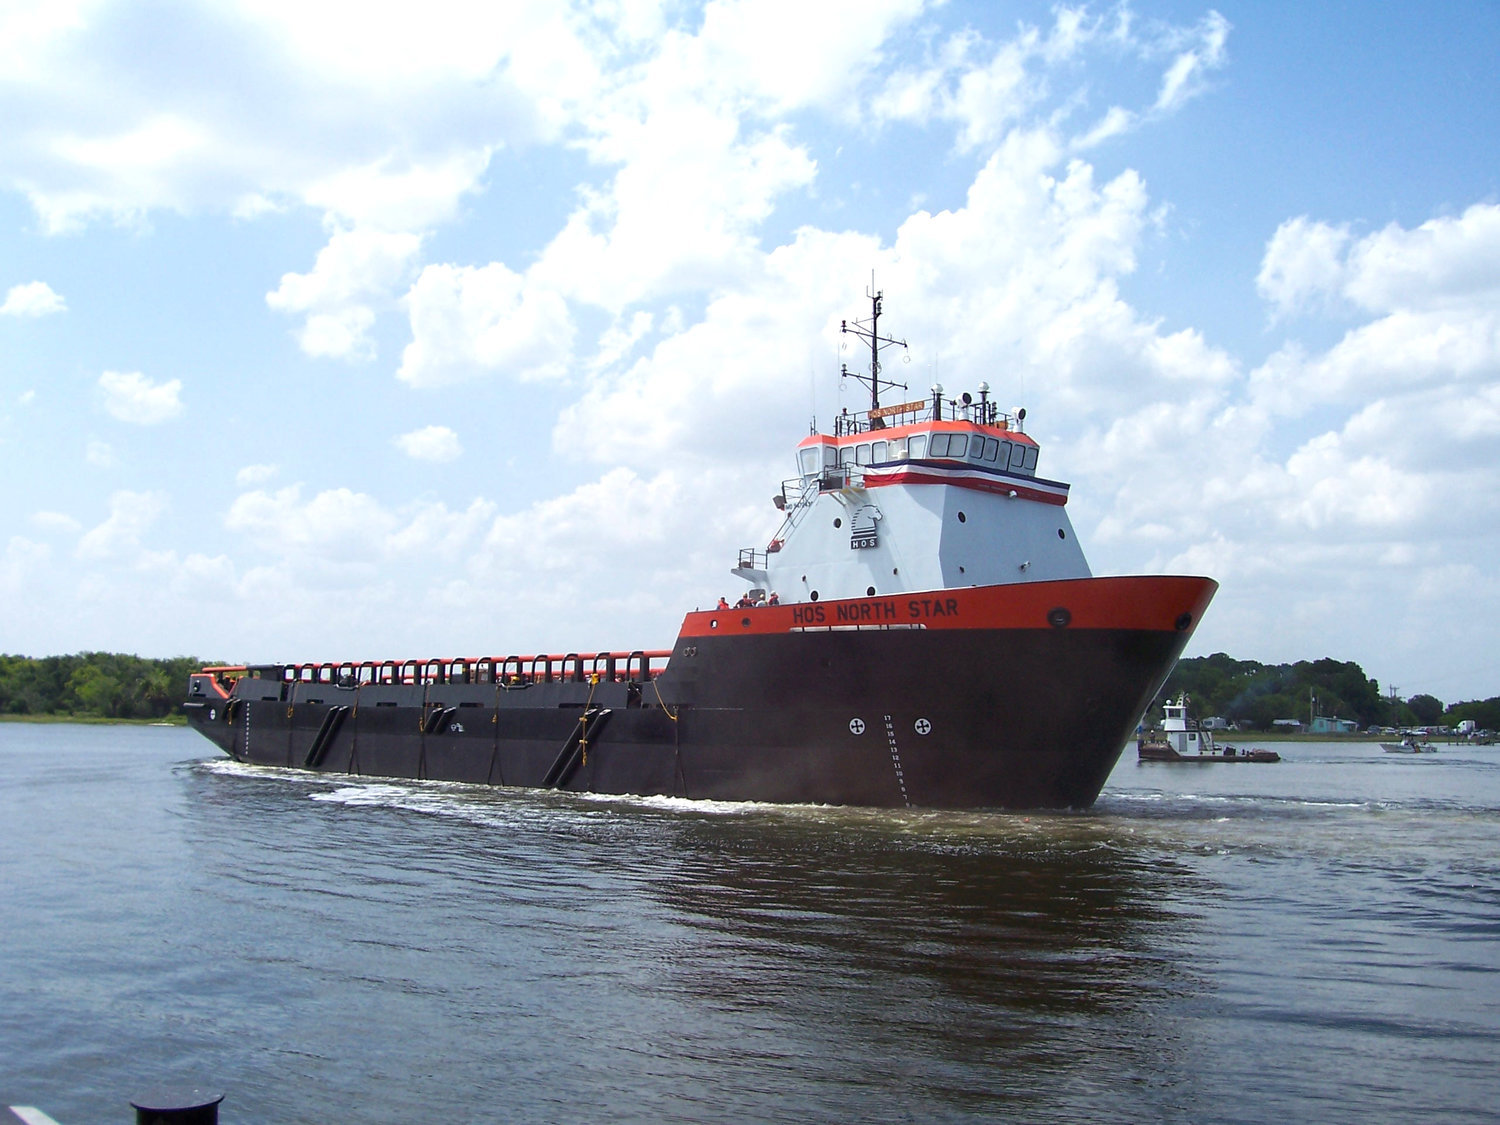 The Steamship Authority is buying the offshore service vessel North Star to replace the aging freight boat M/V Sankaty.